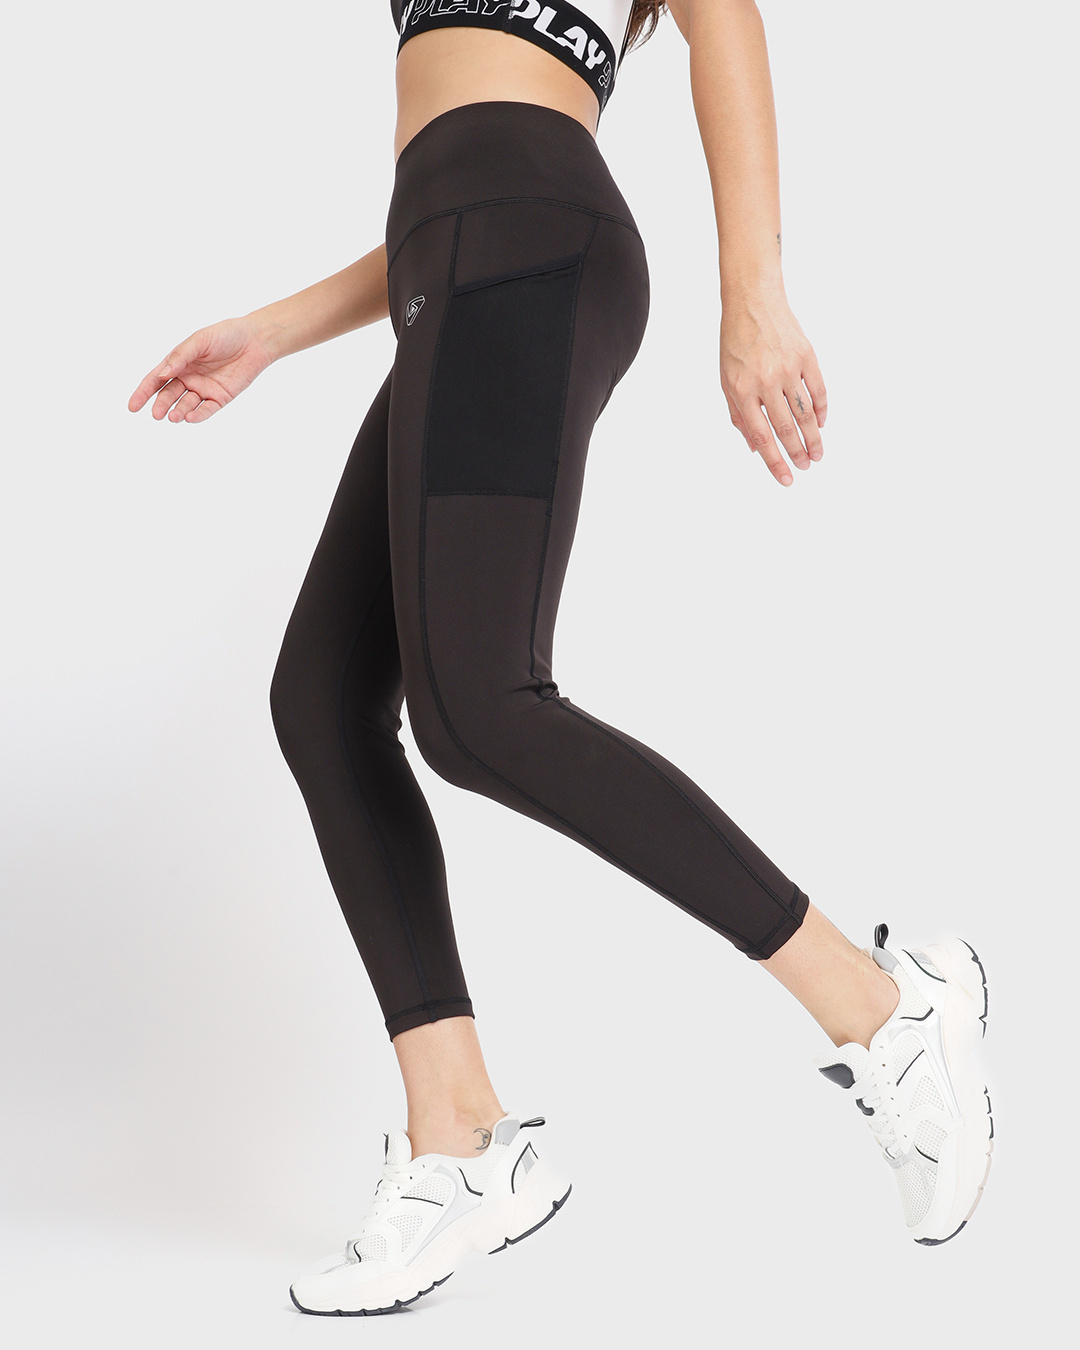 Women's SC Active Tights - Black/TCU and Bayleaf/TCF